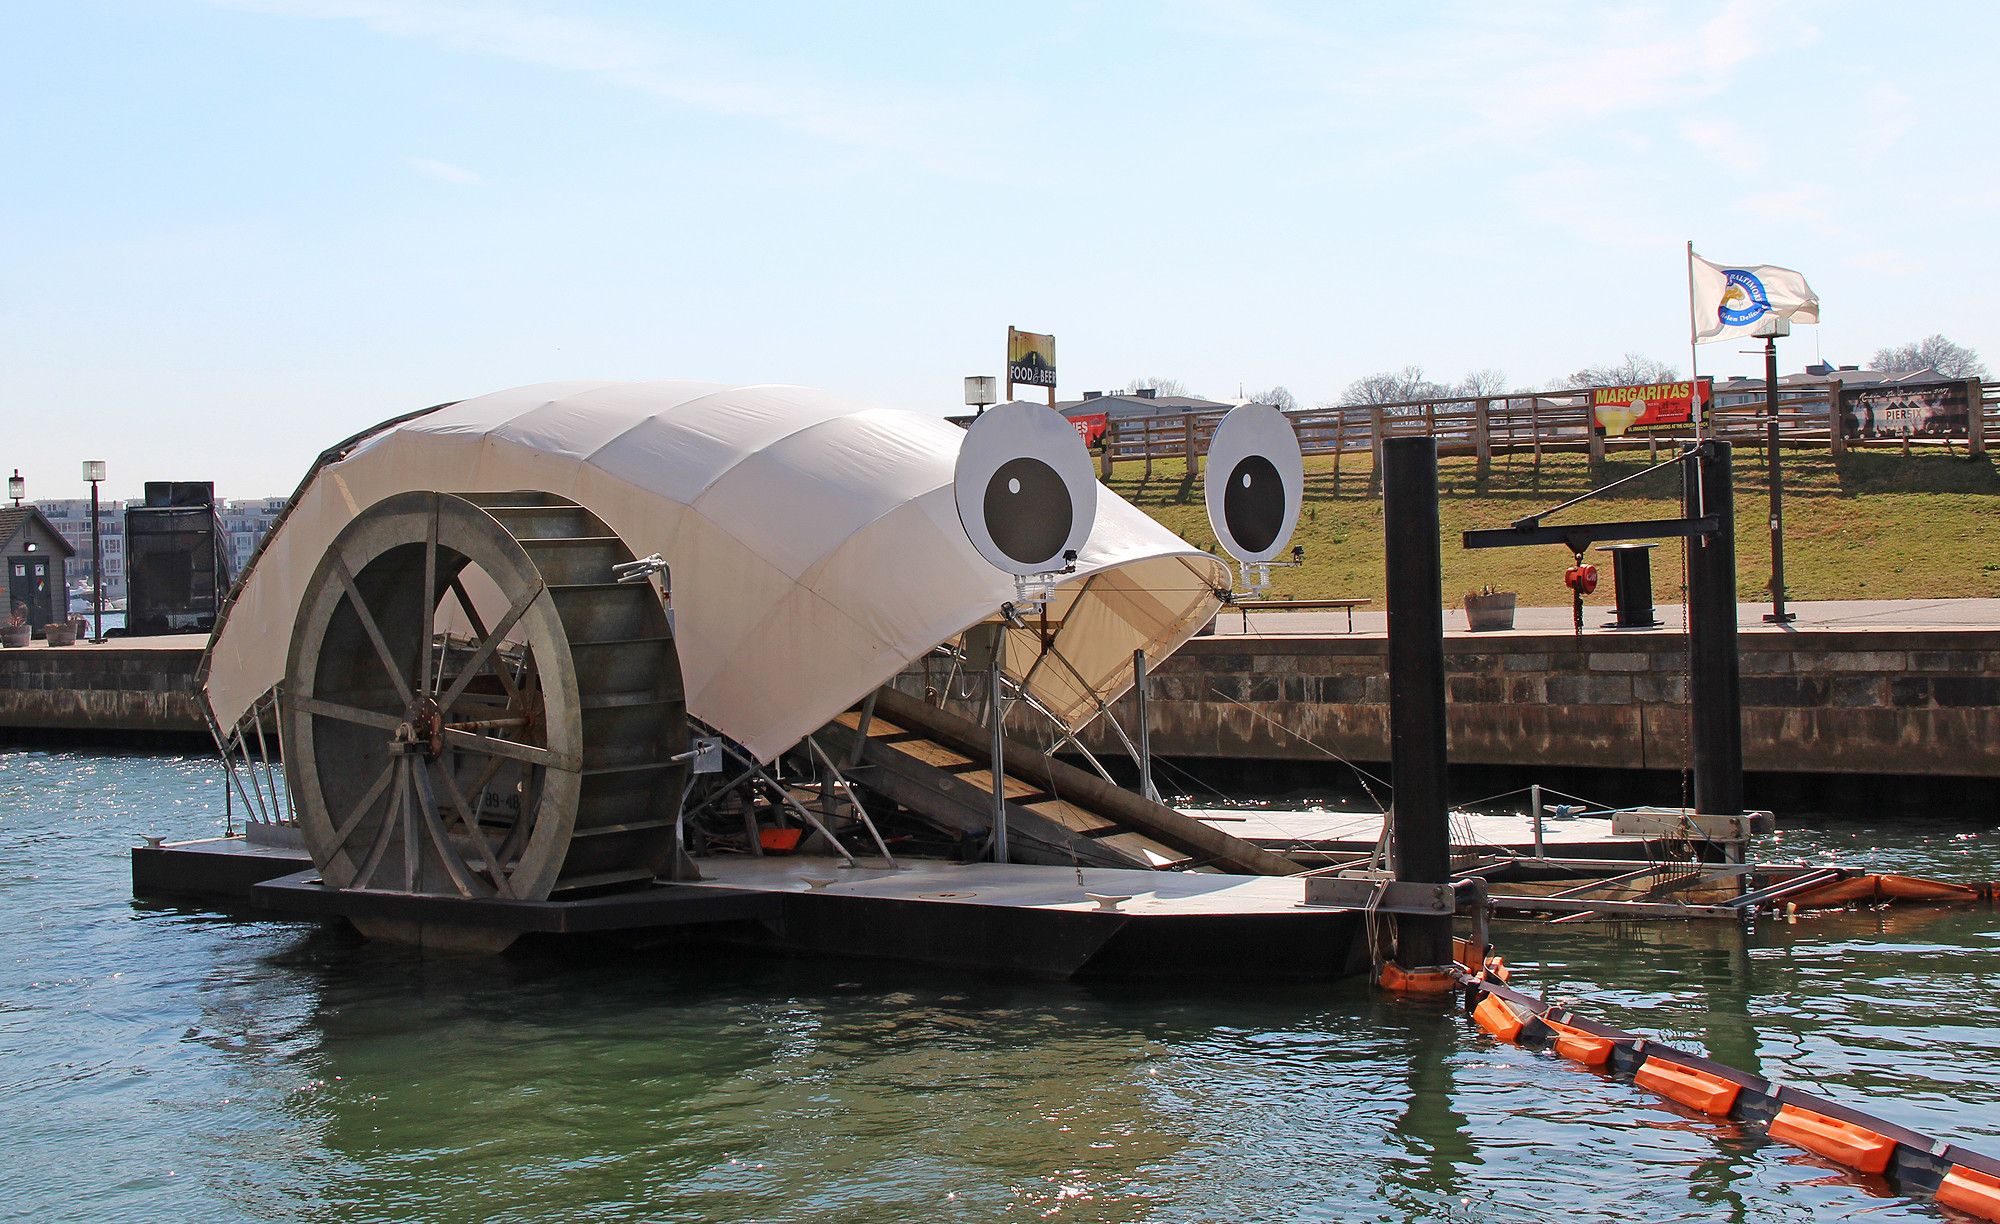 Apparently Baltimore has a trash eater called "Professor Trash Wheel" that keeps the water clean and I'm sad i didn't know sooner